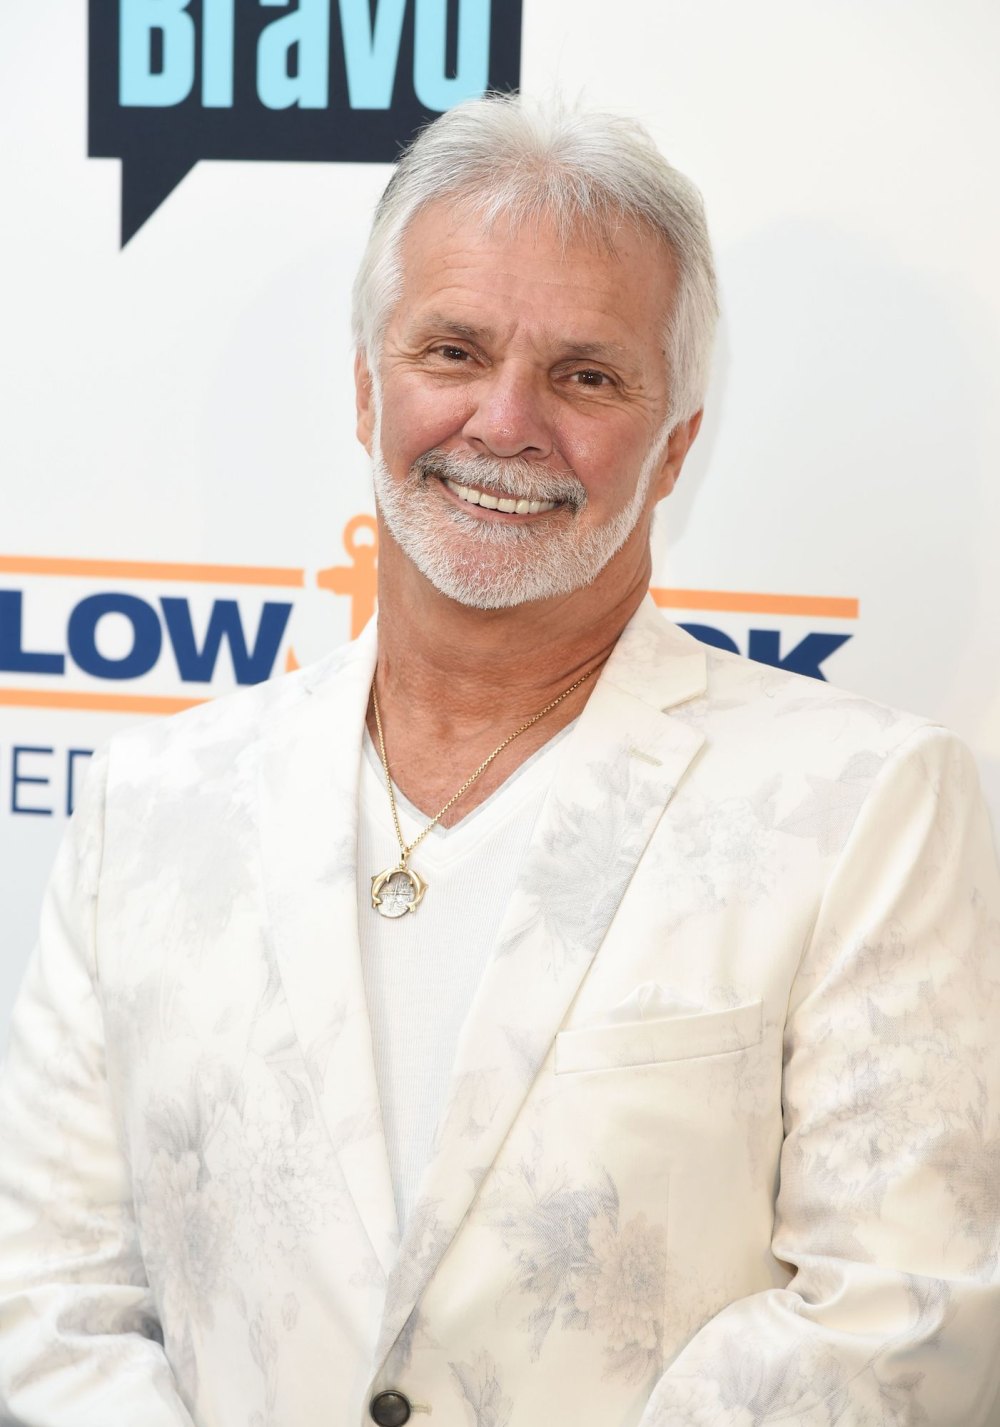 Captain Lee Breaks His Silence on 'Below Deck' Exit Ahead of Season 11: 'I Was Just Not Invited Back'